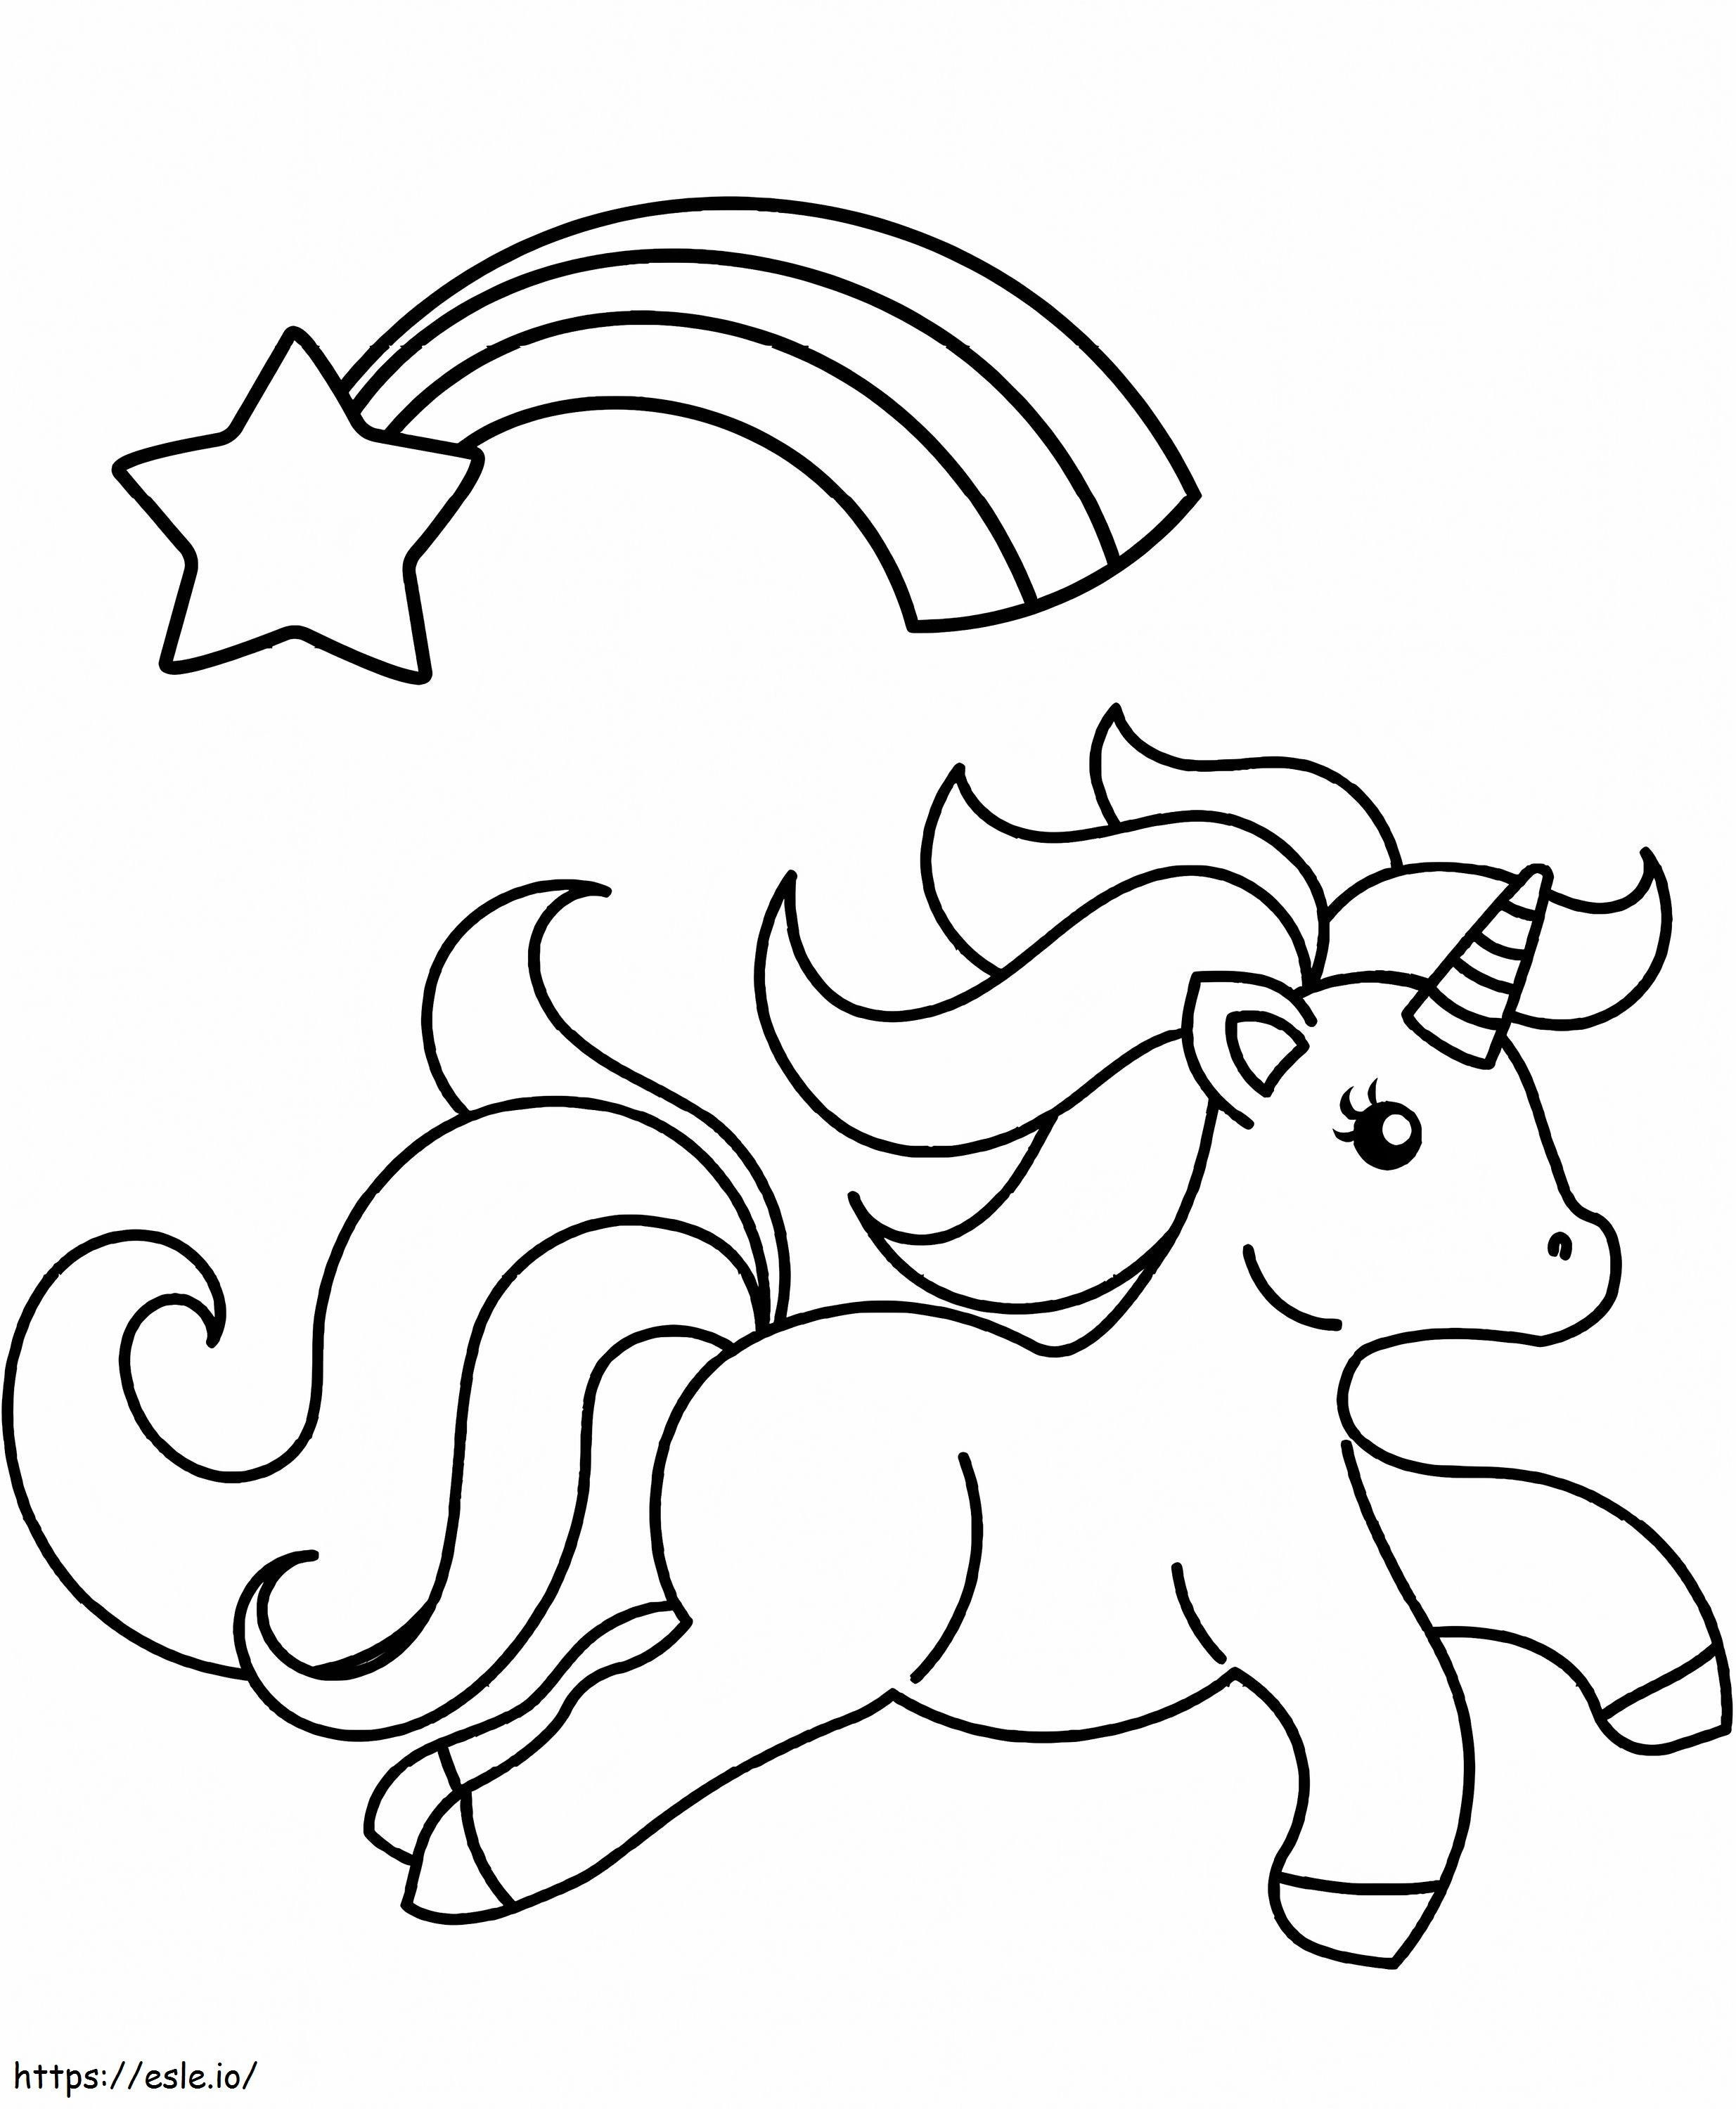 1564449032 Unicorn With A Shooting Star A4 coloring page